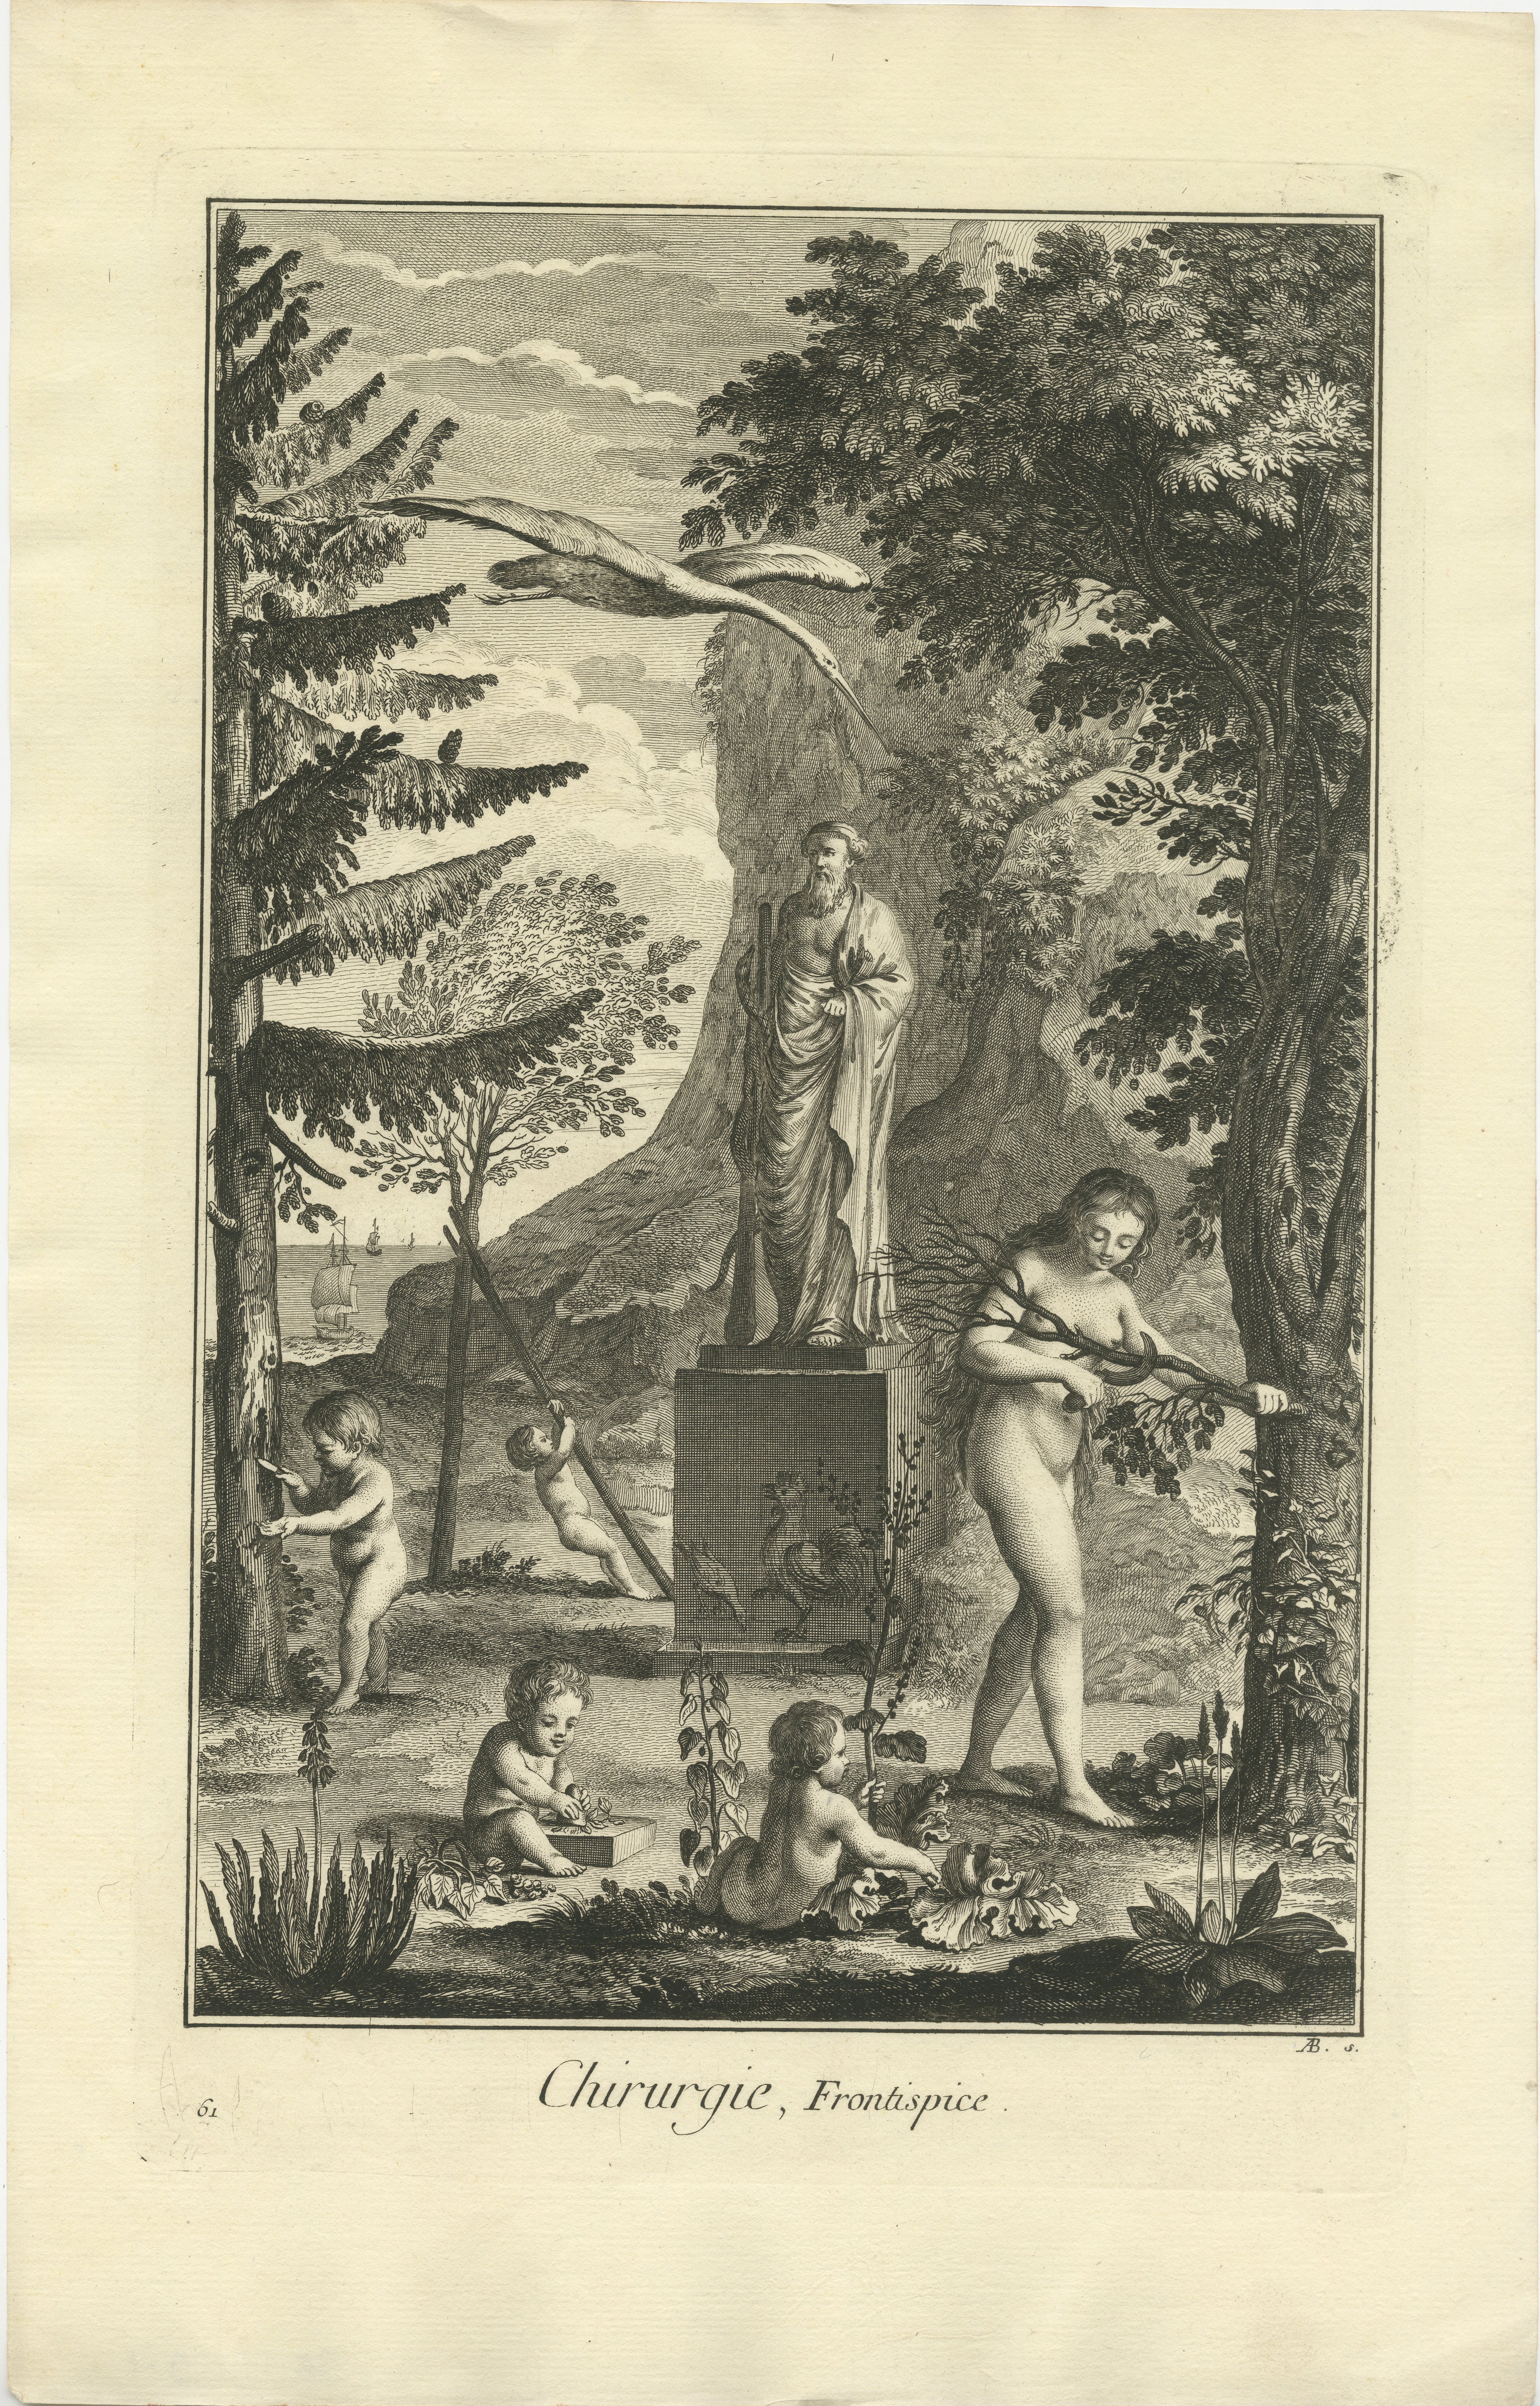 Plate : 'Chirurgie, Frontispice.' (Surgery, frontispiece). 

This plate shows Hippocrates with a Rod of Asclepius, a naked woman cutting a branch, young children playing, a stork flying over, a rooster depicted on the pedestal, trees and boats in